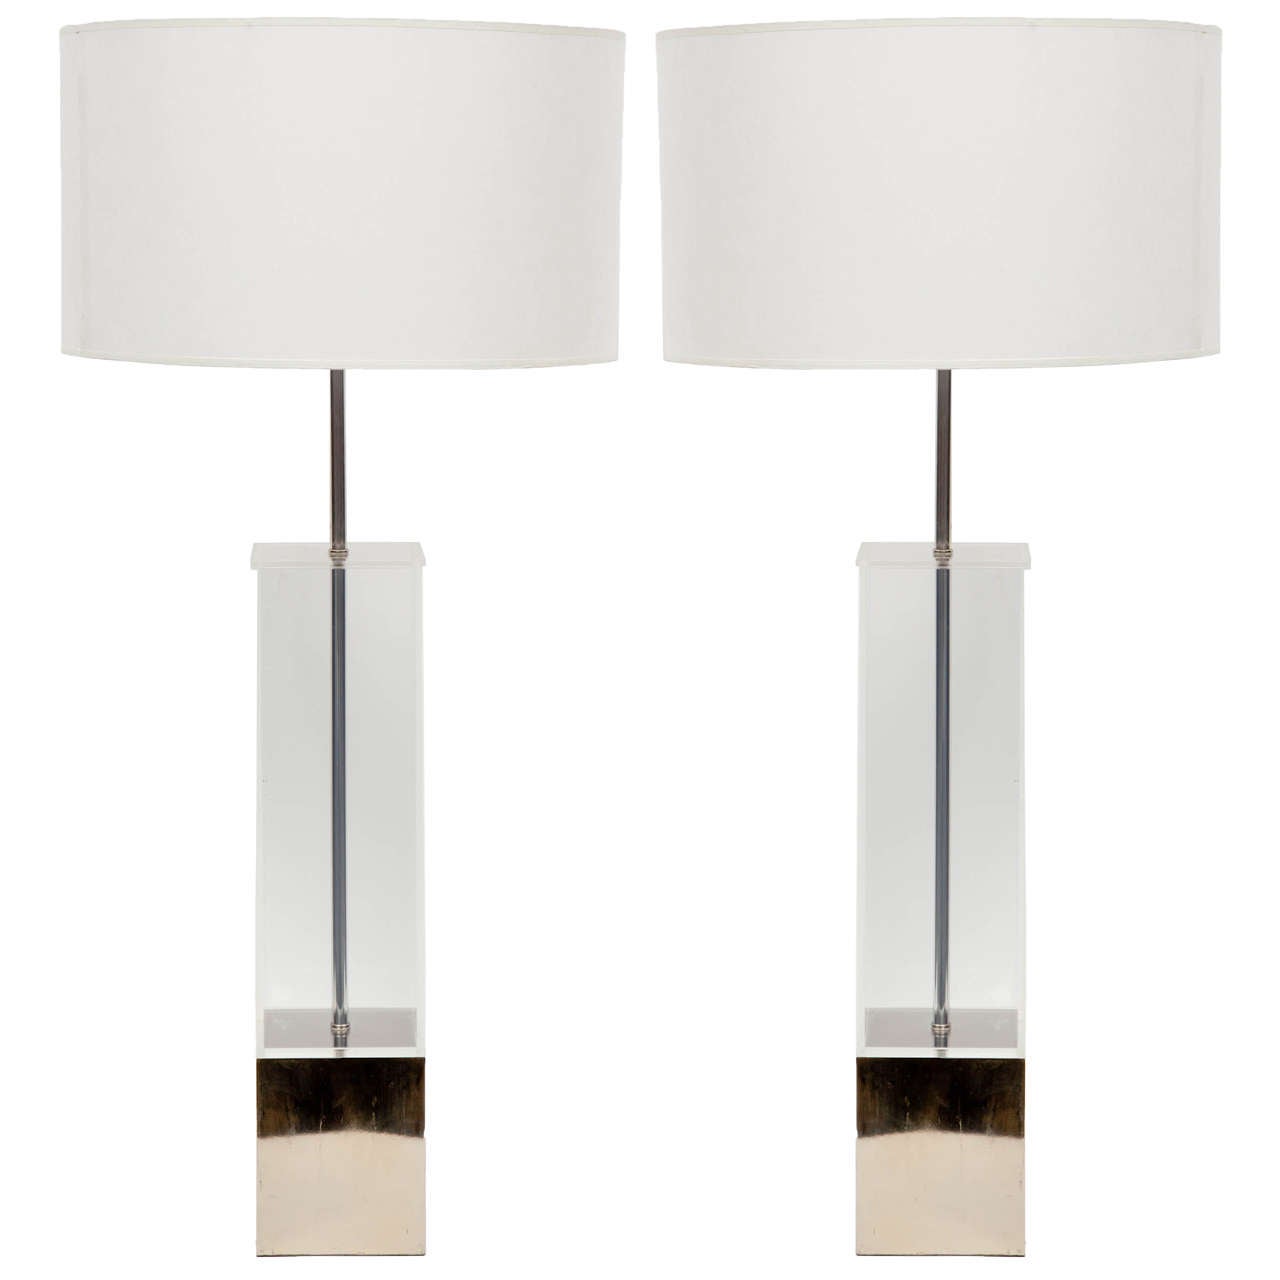 Pair of Lucite Table Lamps with Chrome Base by Laurel